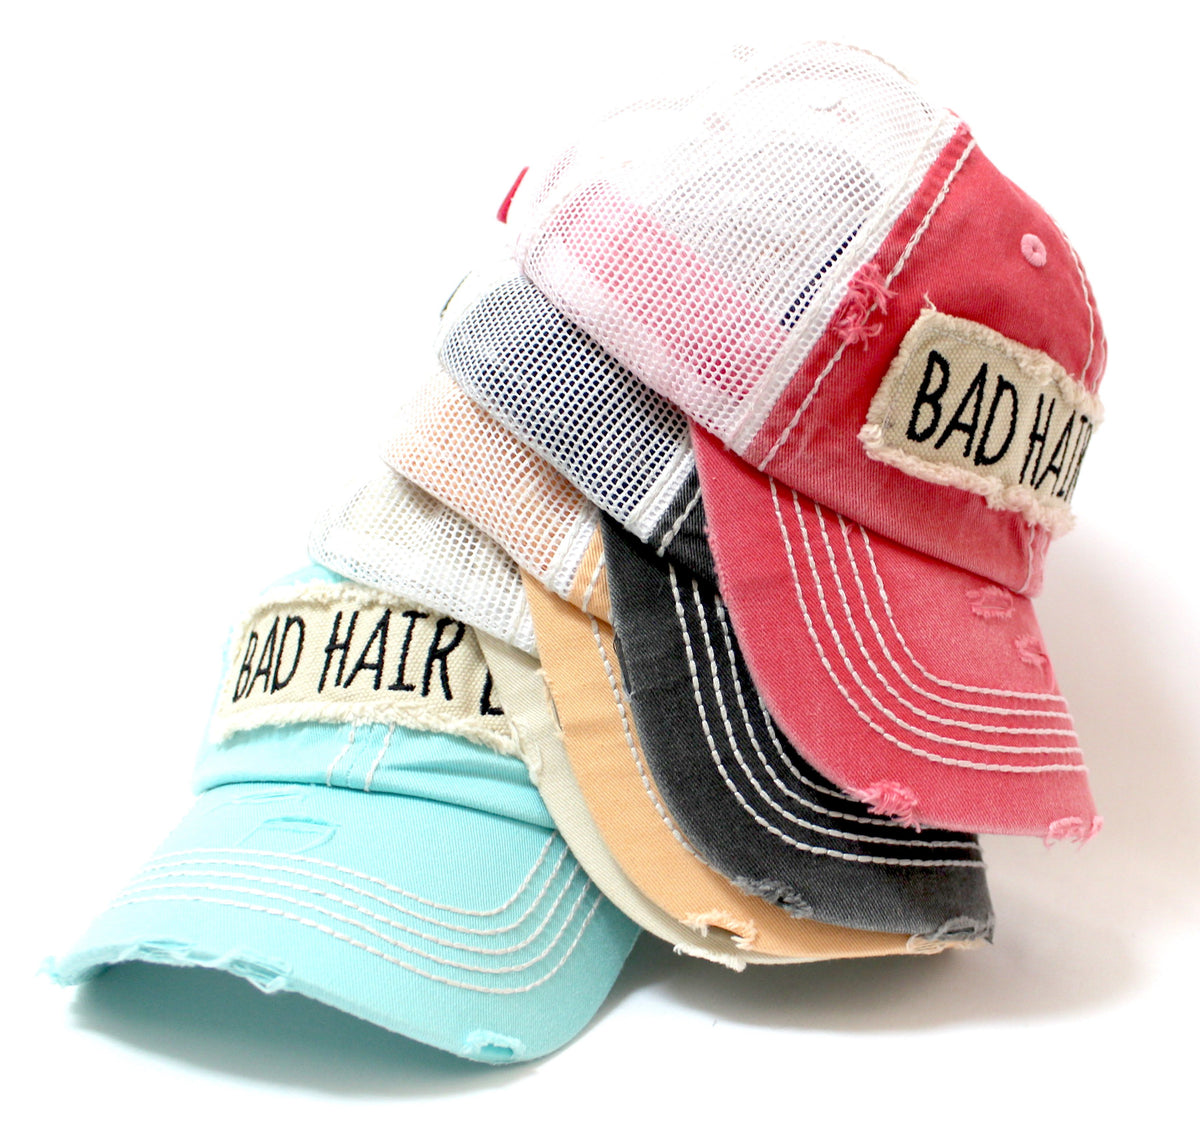 NEW! SUMMER MESH COLLECTION--Stone "BAD HAIR DAY" Vintage Trucker Hat - Caps 'N Vintage 